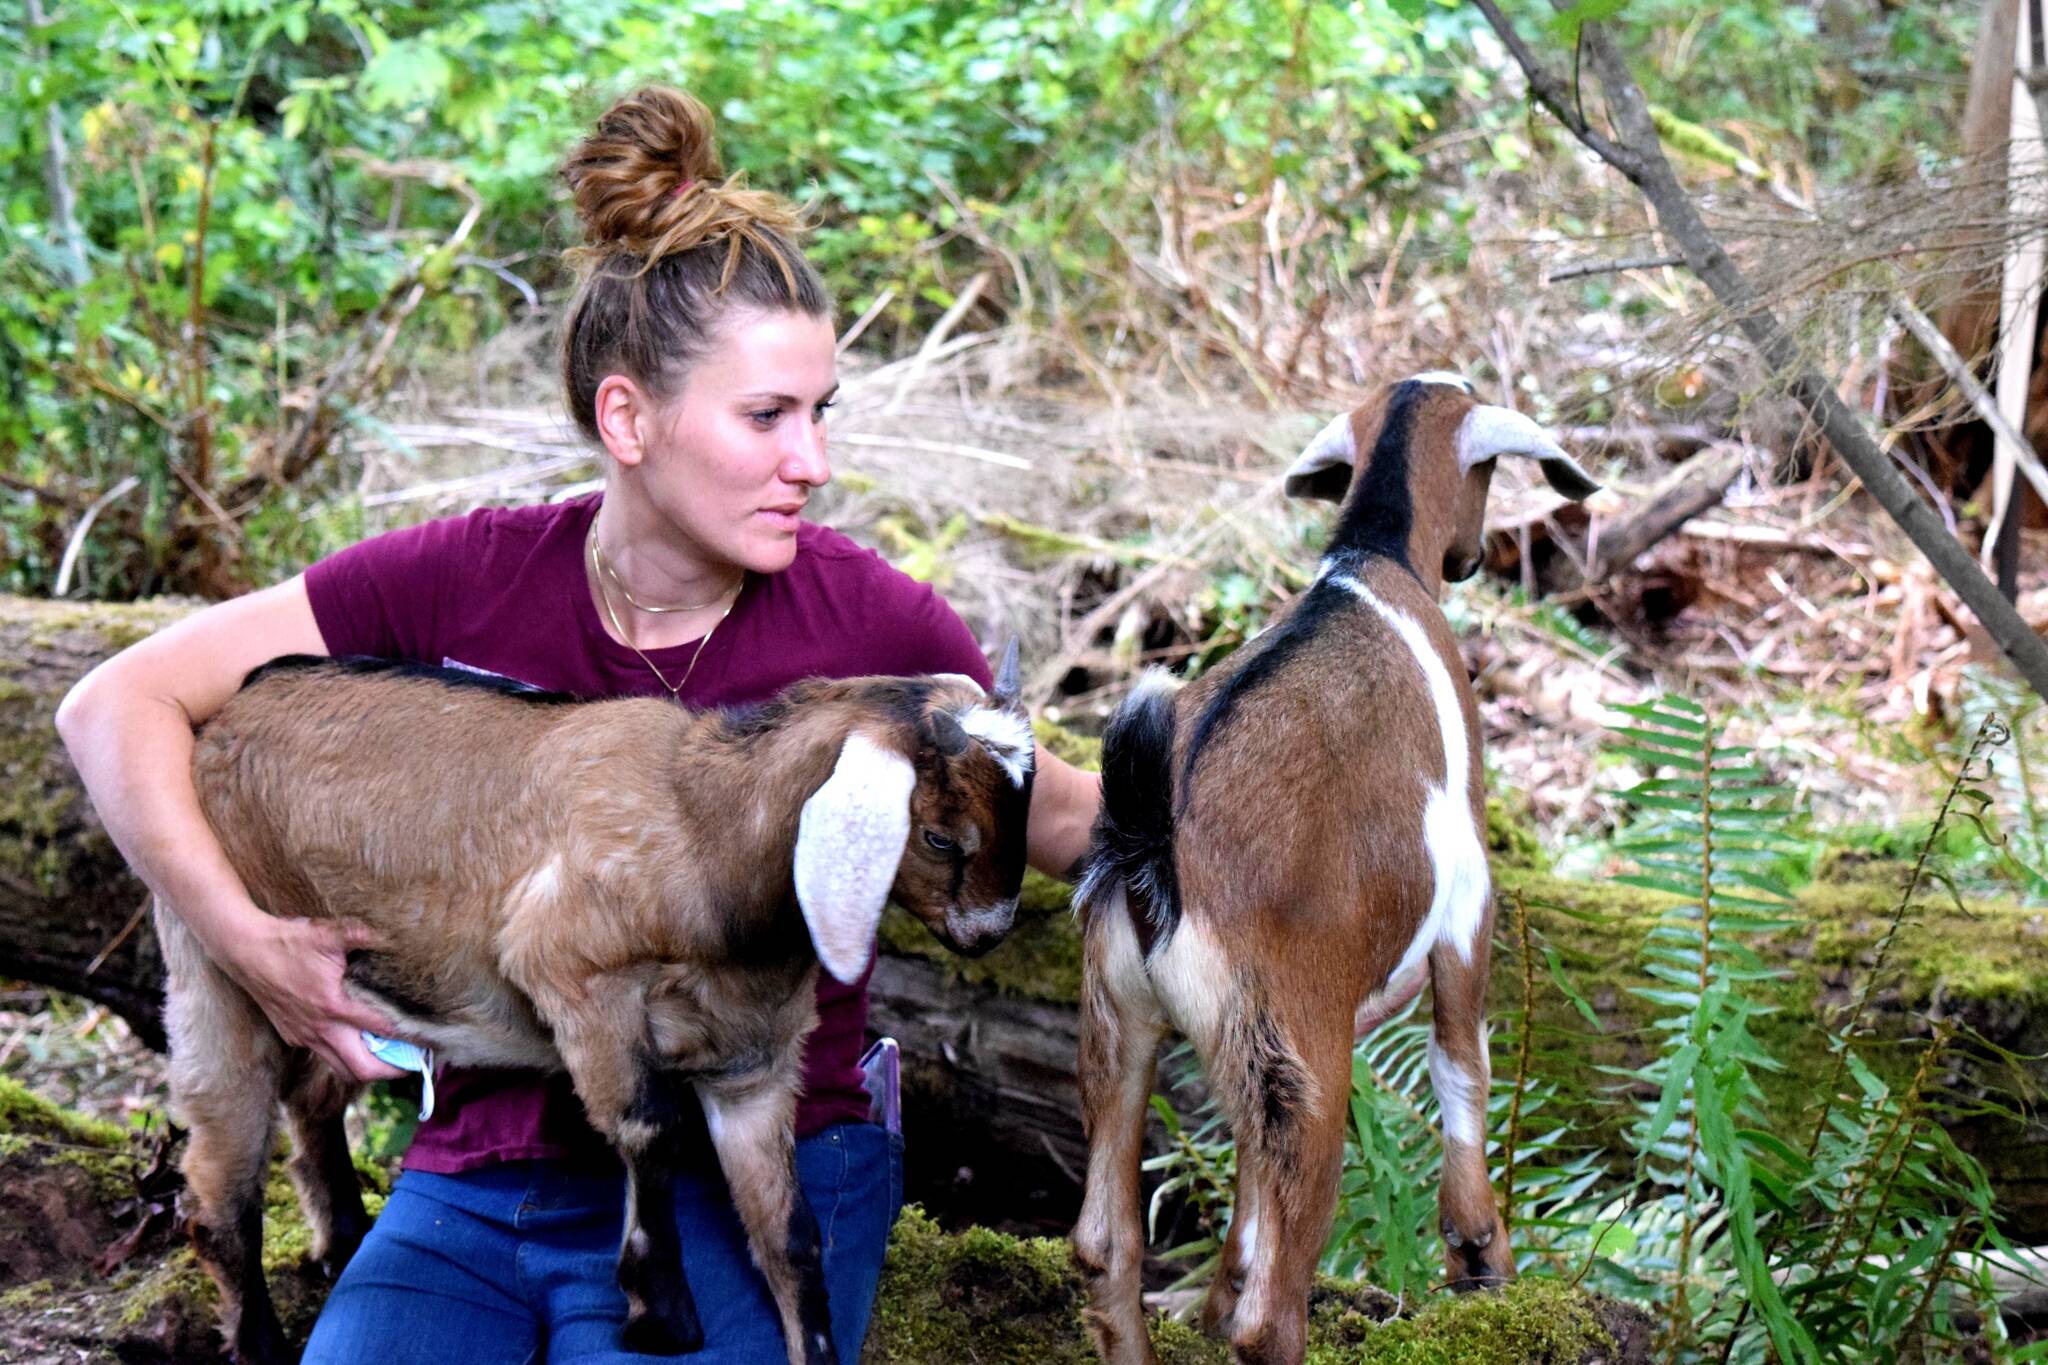 Christina Lathrop, owner of Fancy Farms Forest School in Fall City, poses with her goats. Photo Conor Wilson/Valley Record.